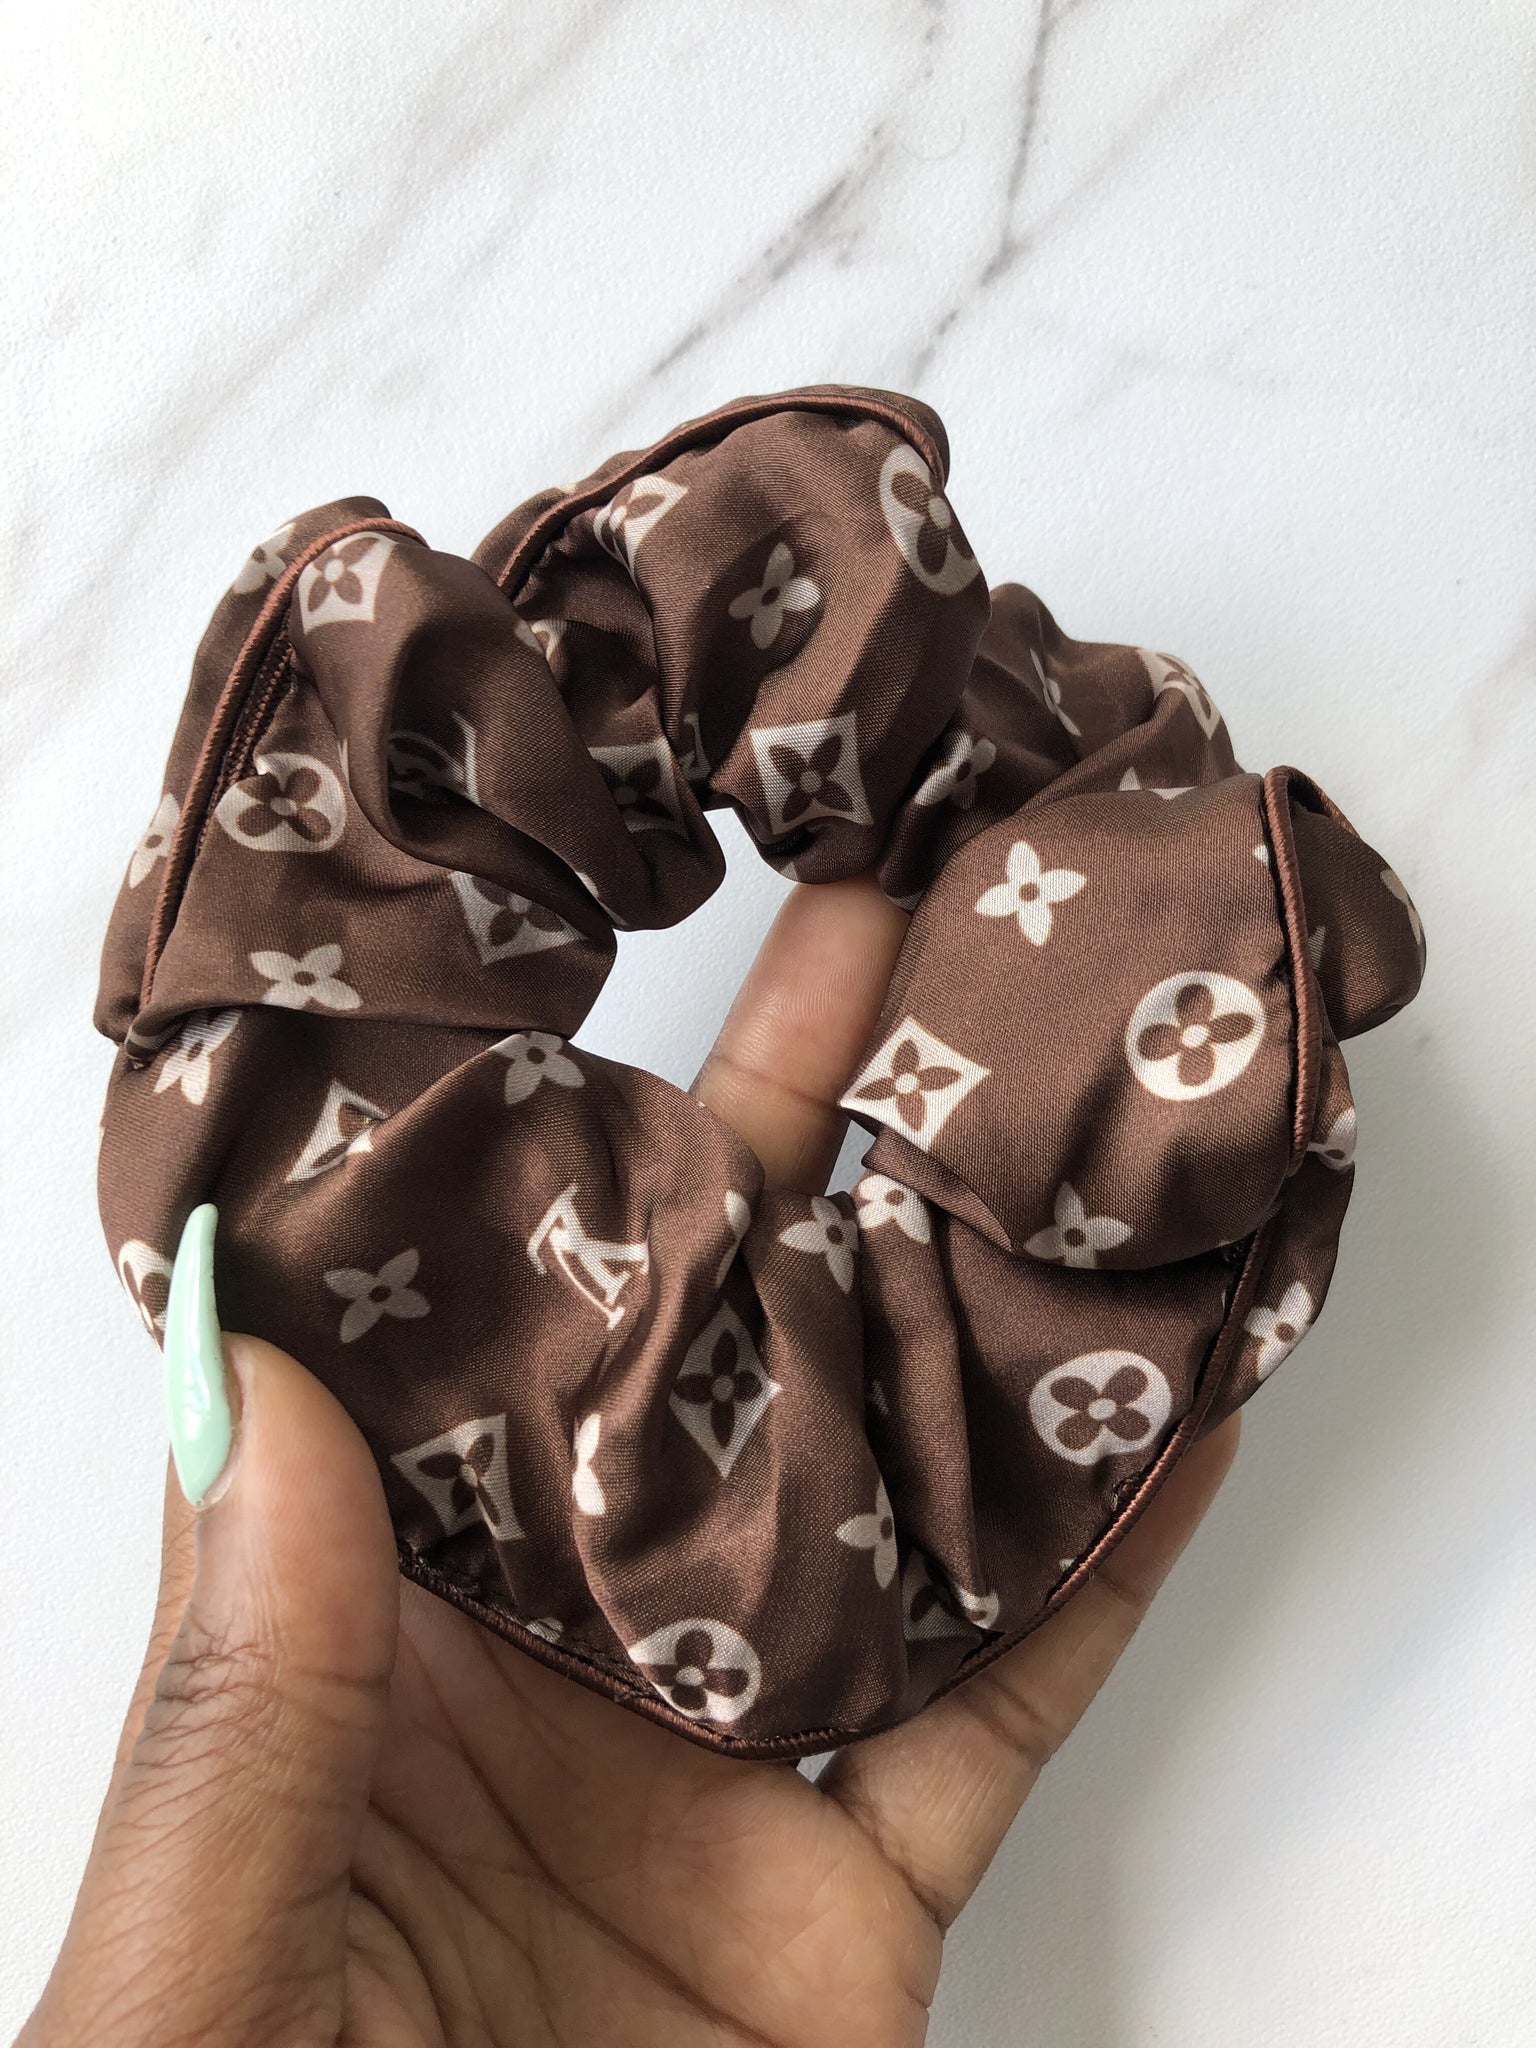 Scrunchie Angel - Louis Vuitton scrunchie🖤 Get the designer look without  the price tag. #louisvuitton #scrunchieangel #designerfabric #superstylish